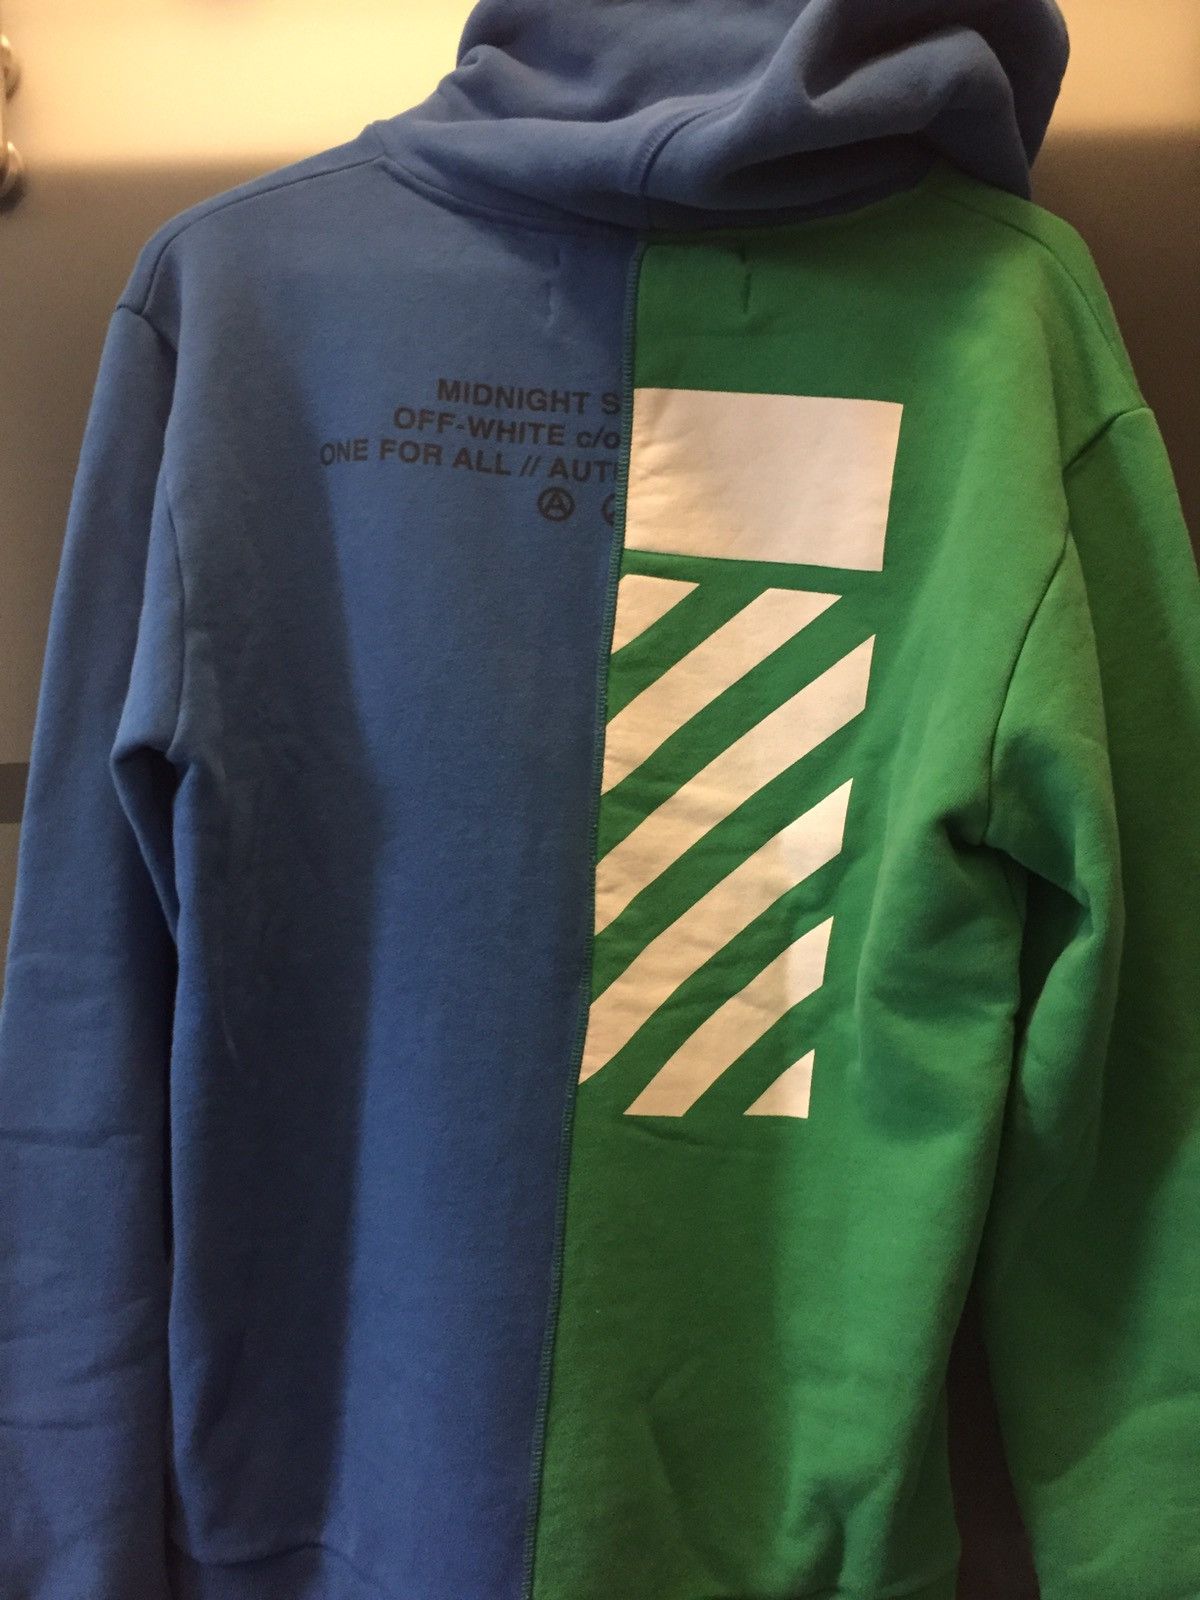 Off-White NEW OFF WHITE X MIDNIGHT PATCHWORK HOODIE MEDIUM Size US M / EU 48-50 / 2 - 2 Preview